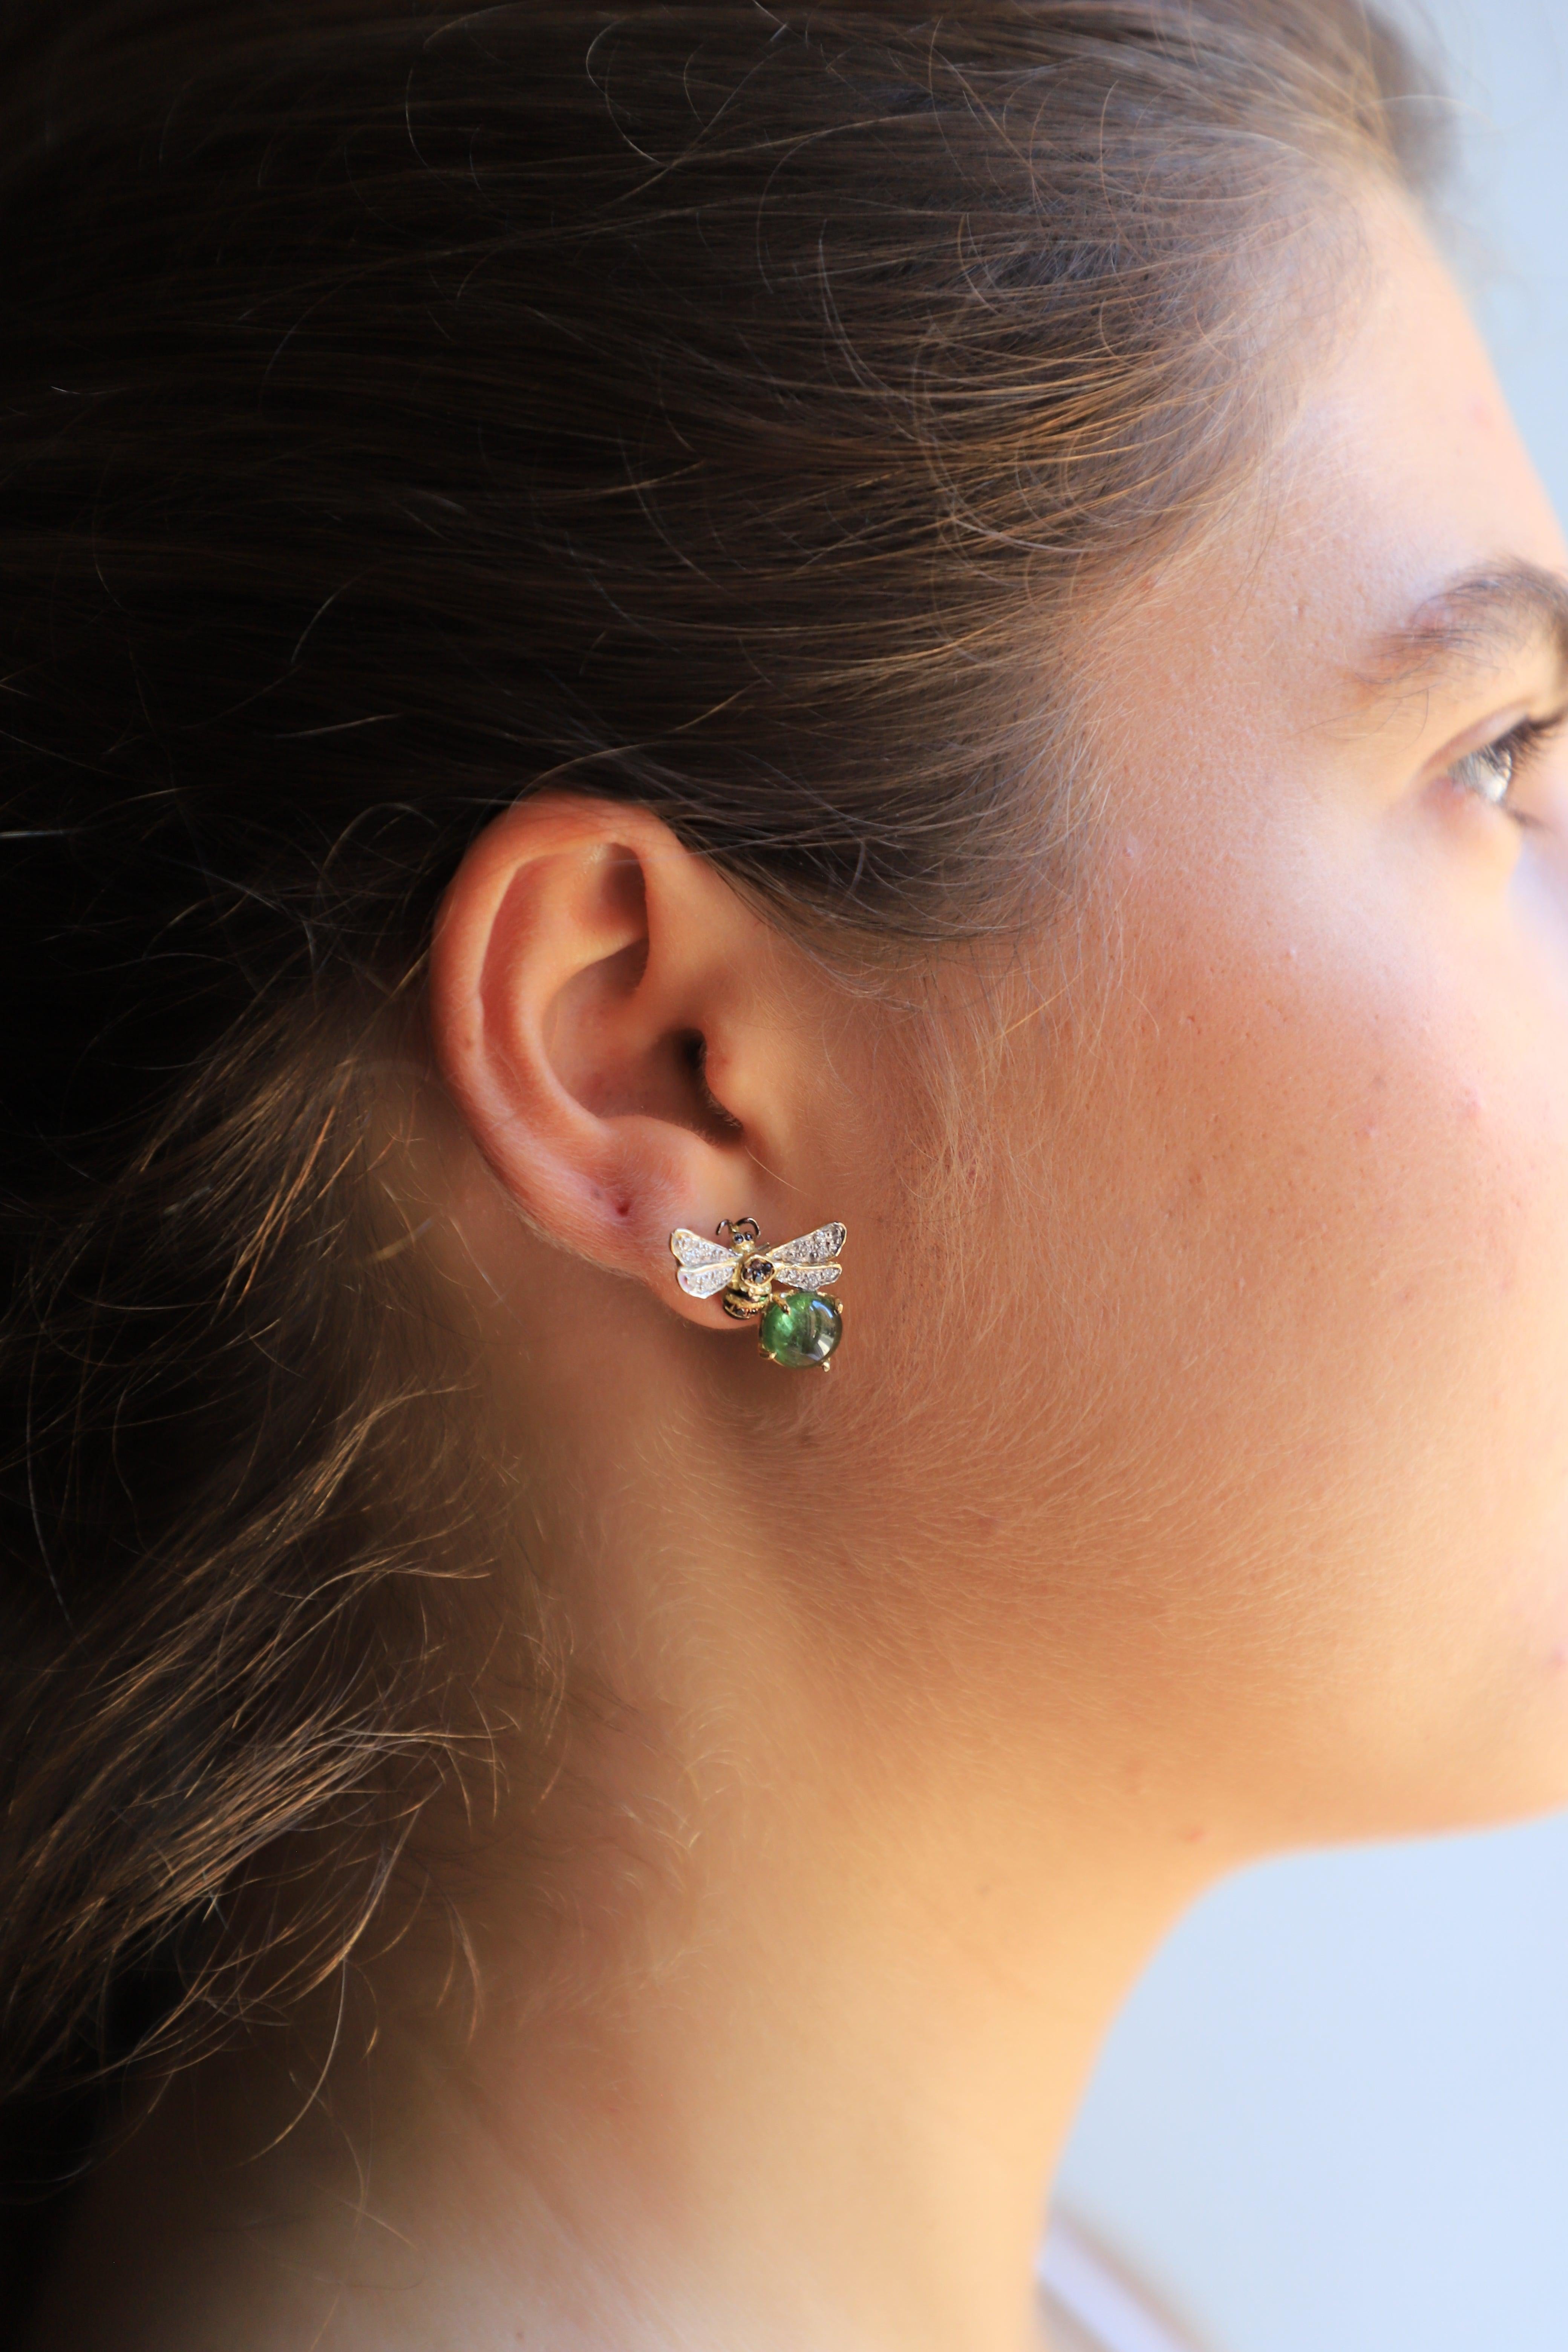 Rossella Ugolini Bees Stud Earrings are a tribute to nature's splendor, handcrafted in Italy with unrivaled artistry.  Handcrafted in 18 Karat Yellow Gold 4 Karats Green Tourmaline 0.16 Karat White Diamond 0.18 Karat Black Diamonds. Unveiling the